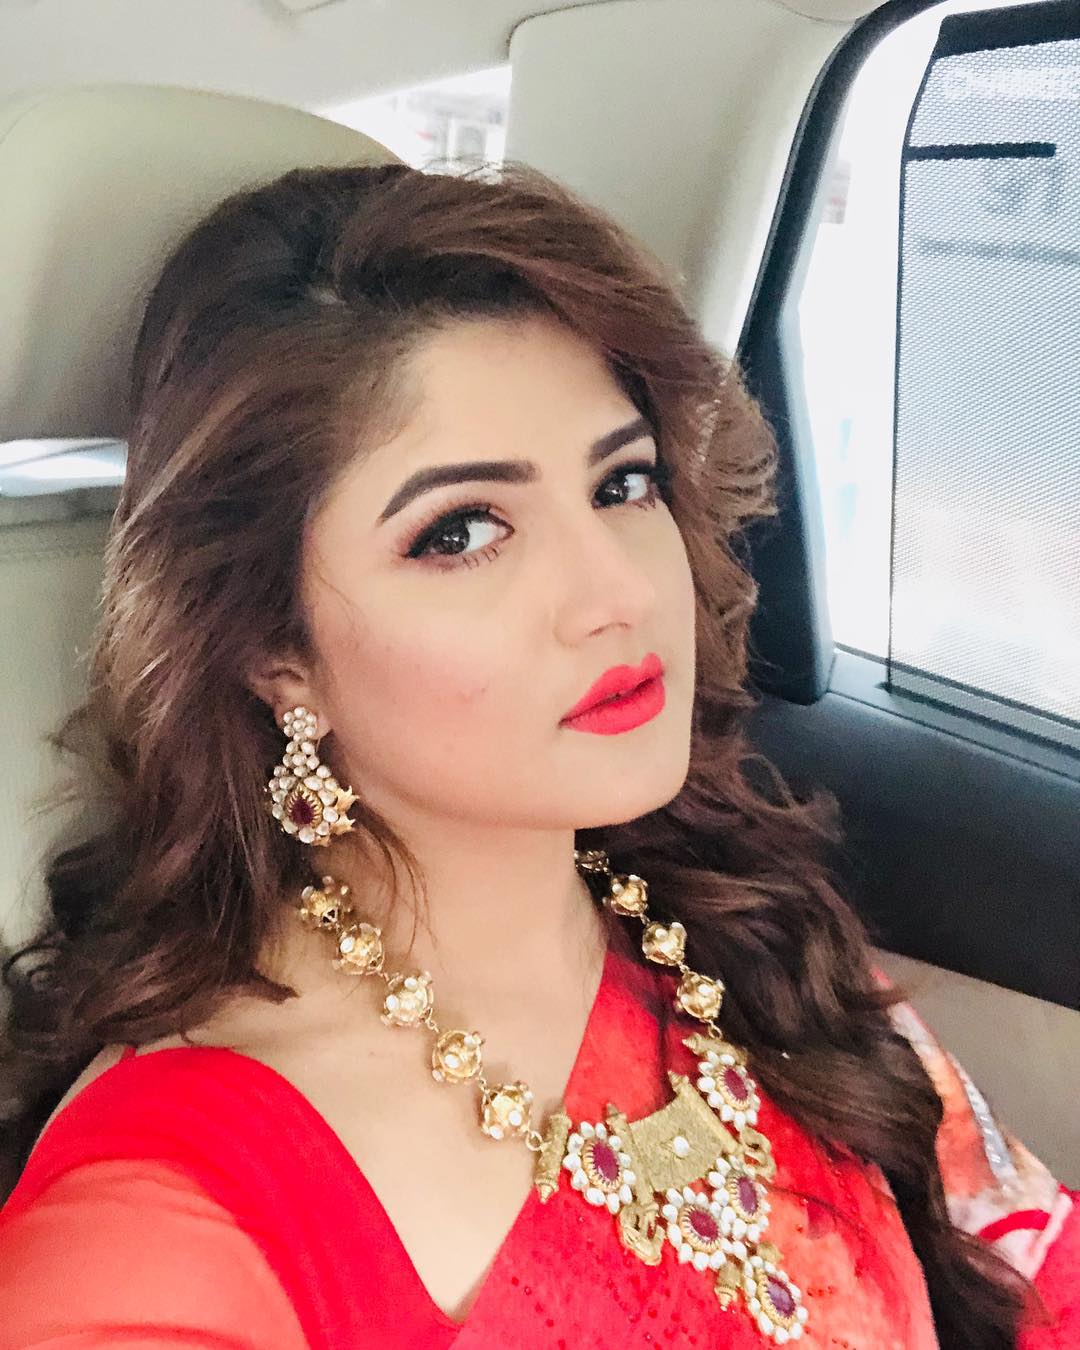 Srabanti chatterjee naked picture Porn Pics, Sex Photos, XXX Images ...